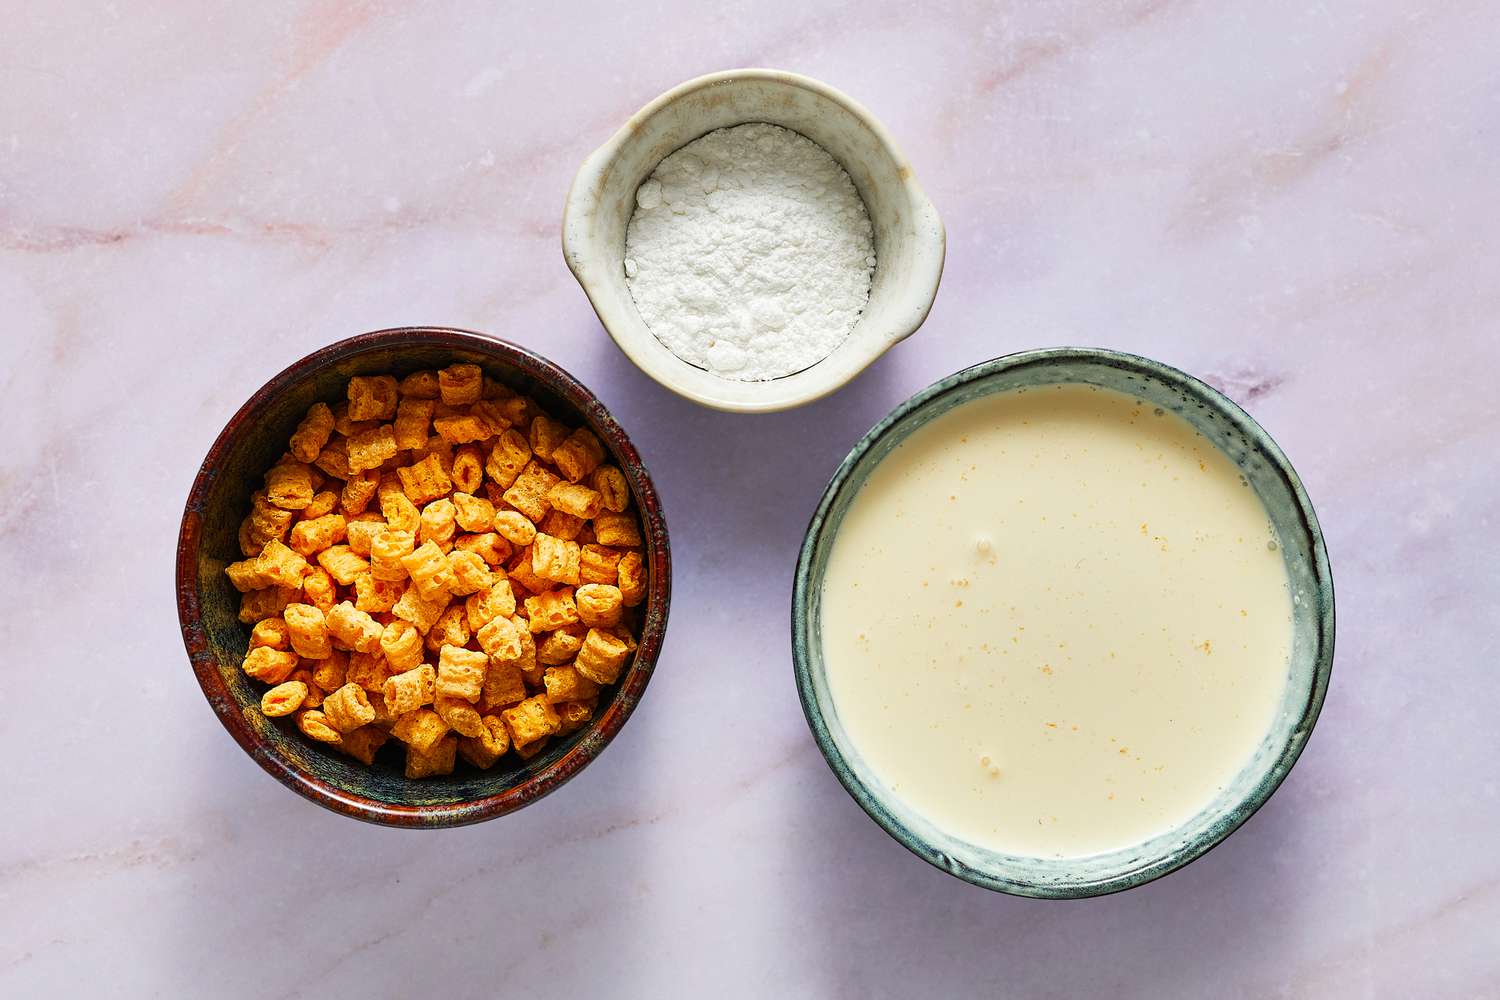 Ingredients to make Cap'n Crunch whipped cream